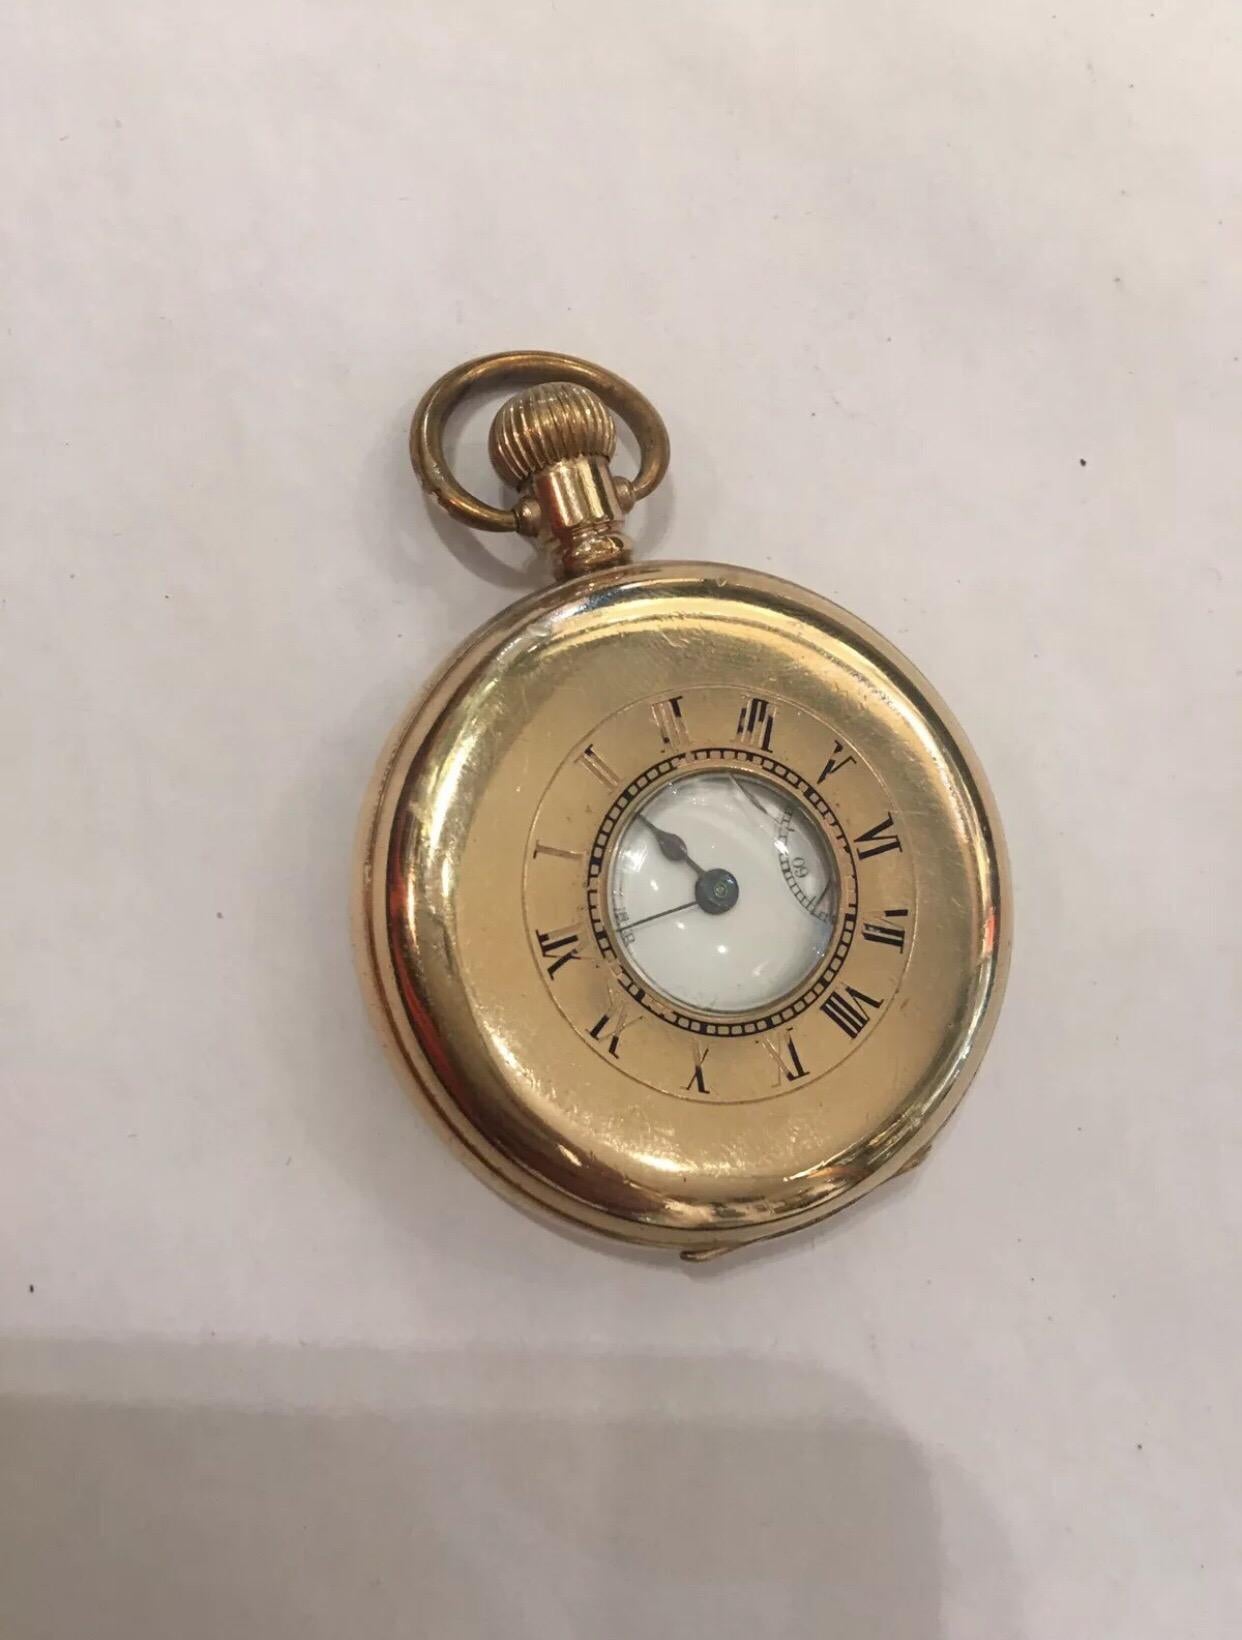 
Antique gold plated Half Hunter Dennison Cased Pocket Watch Signed Waltham U.S.A.

This watch is in good working order. And it is ticking well. There is a visible crack on the top cover glass.